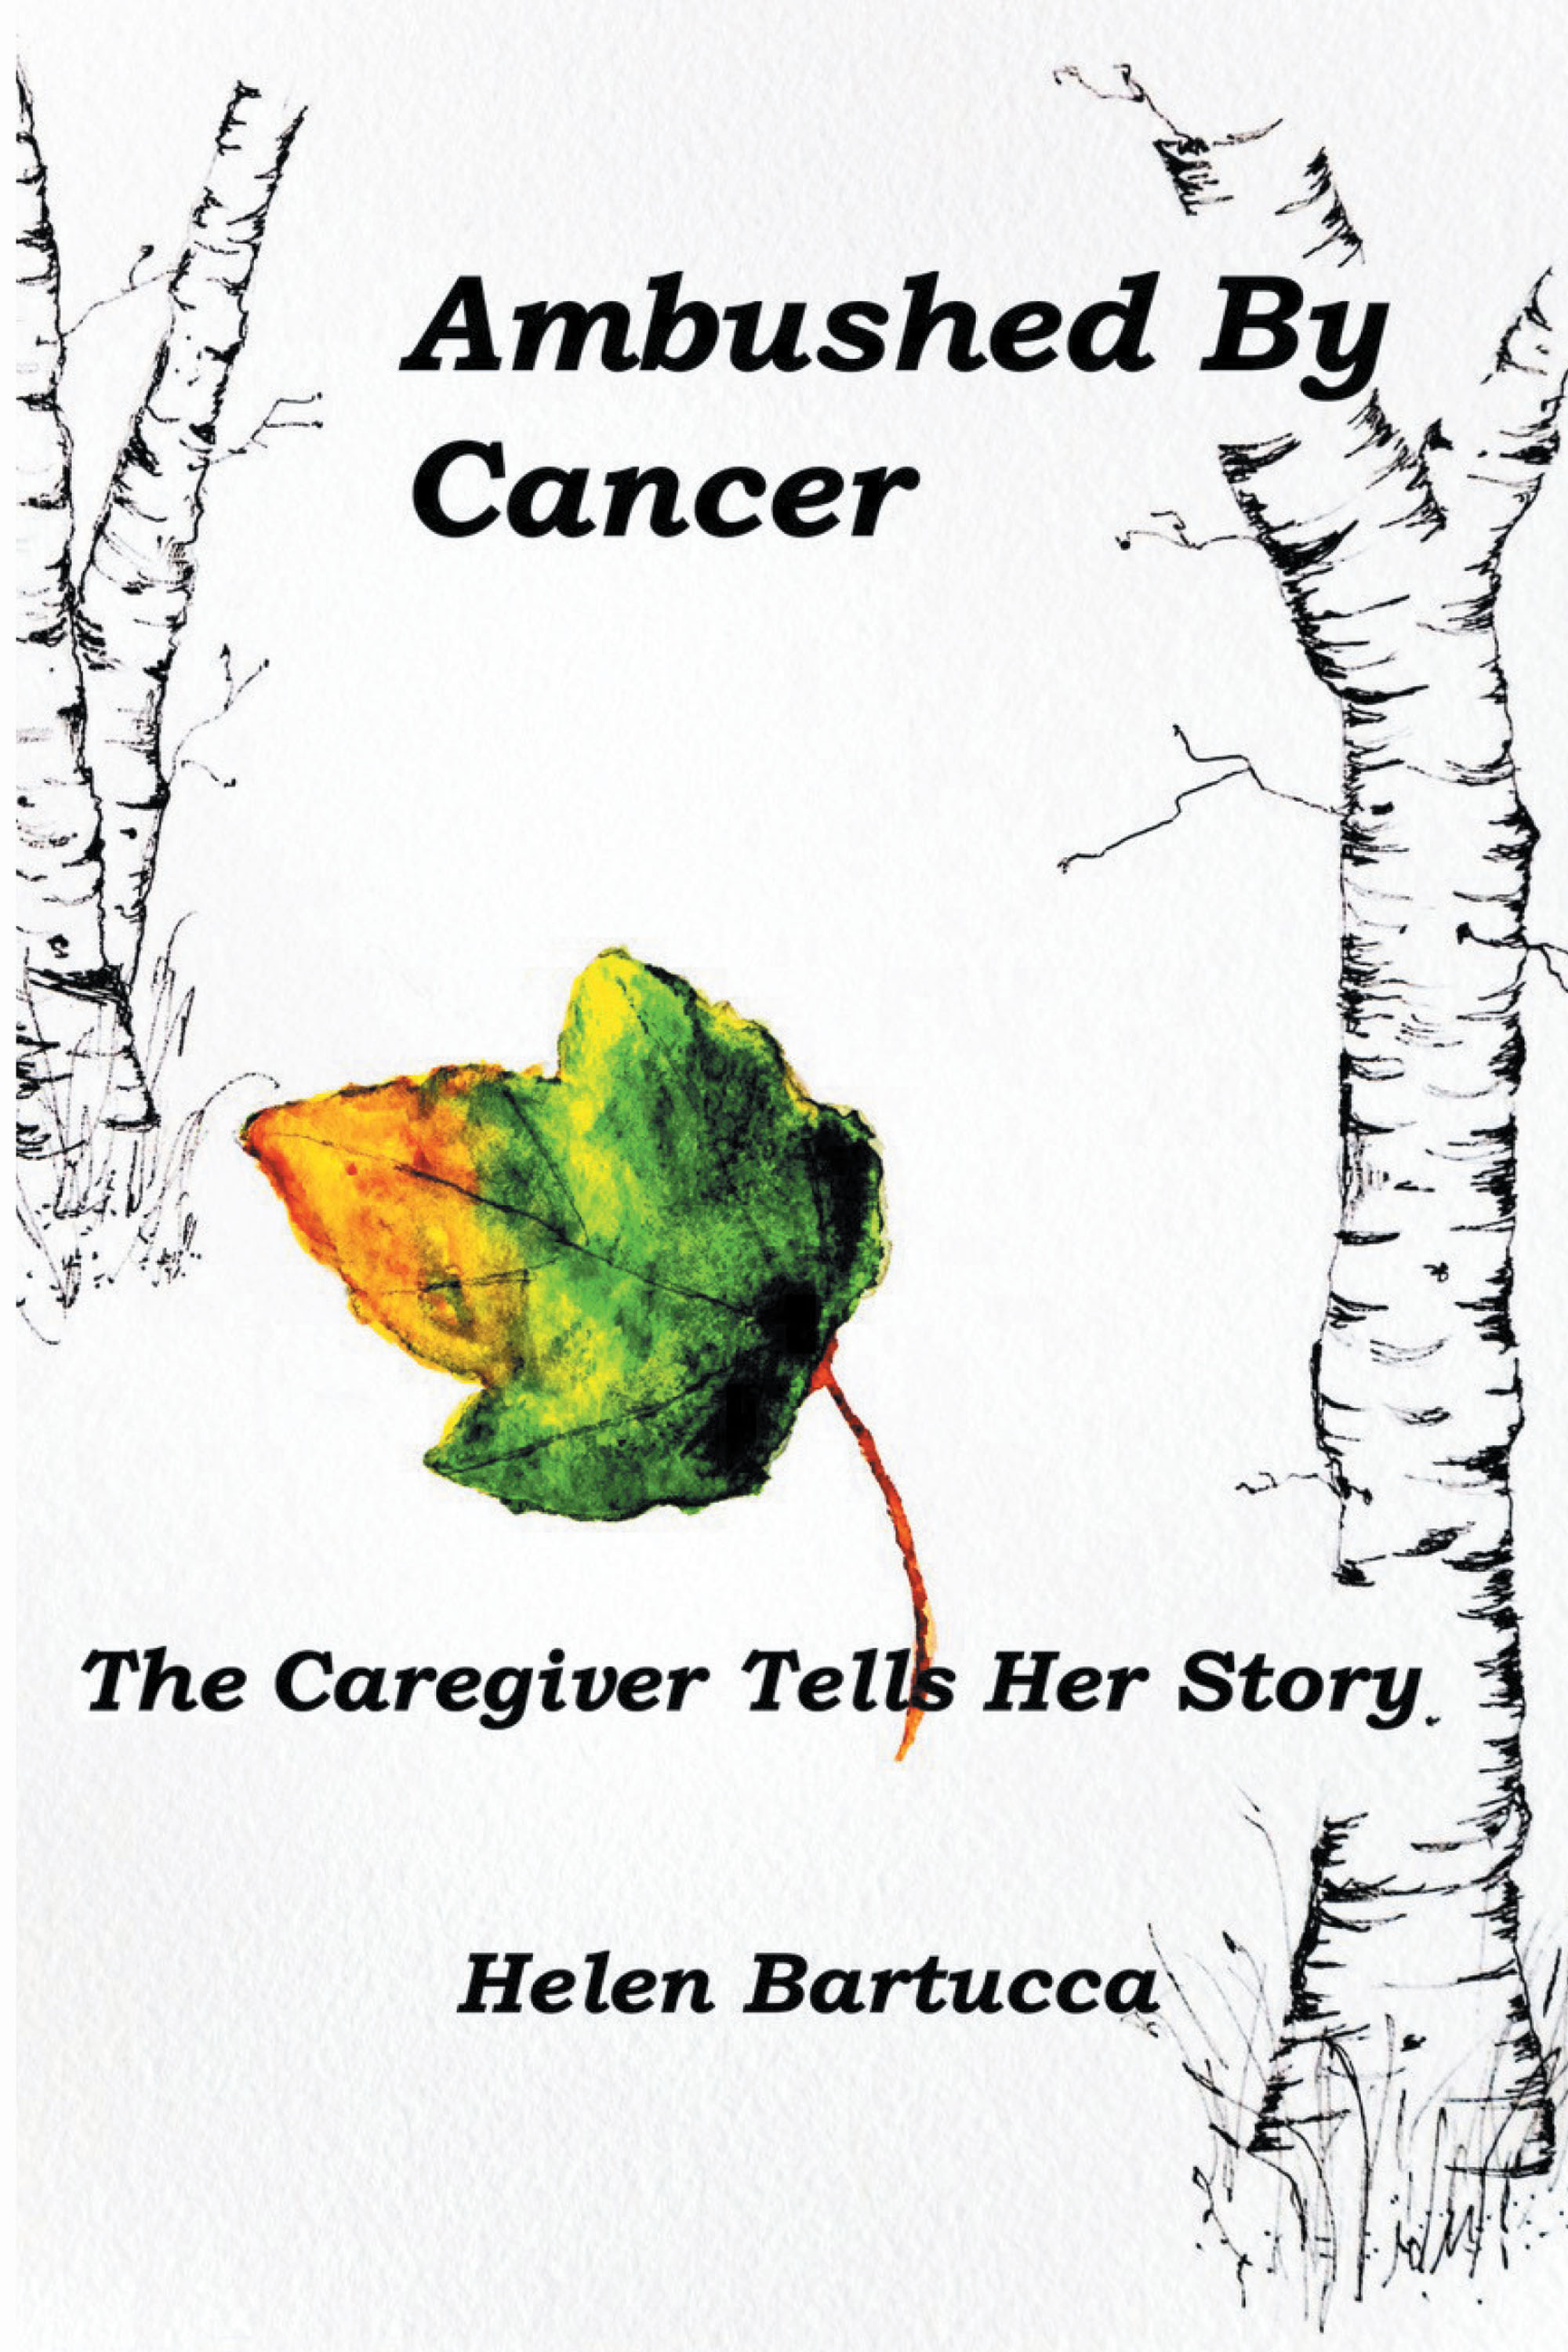 Author Helen Bartucca’s New Book, "Ambushed by Cancer: The Caregiver Tells Her Story," is a Moving Memoir That Shares the Author’s Experience as a Caregiver